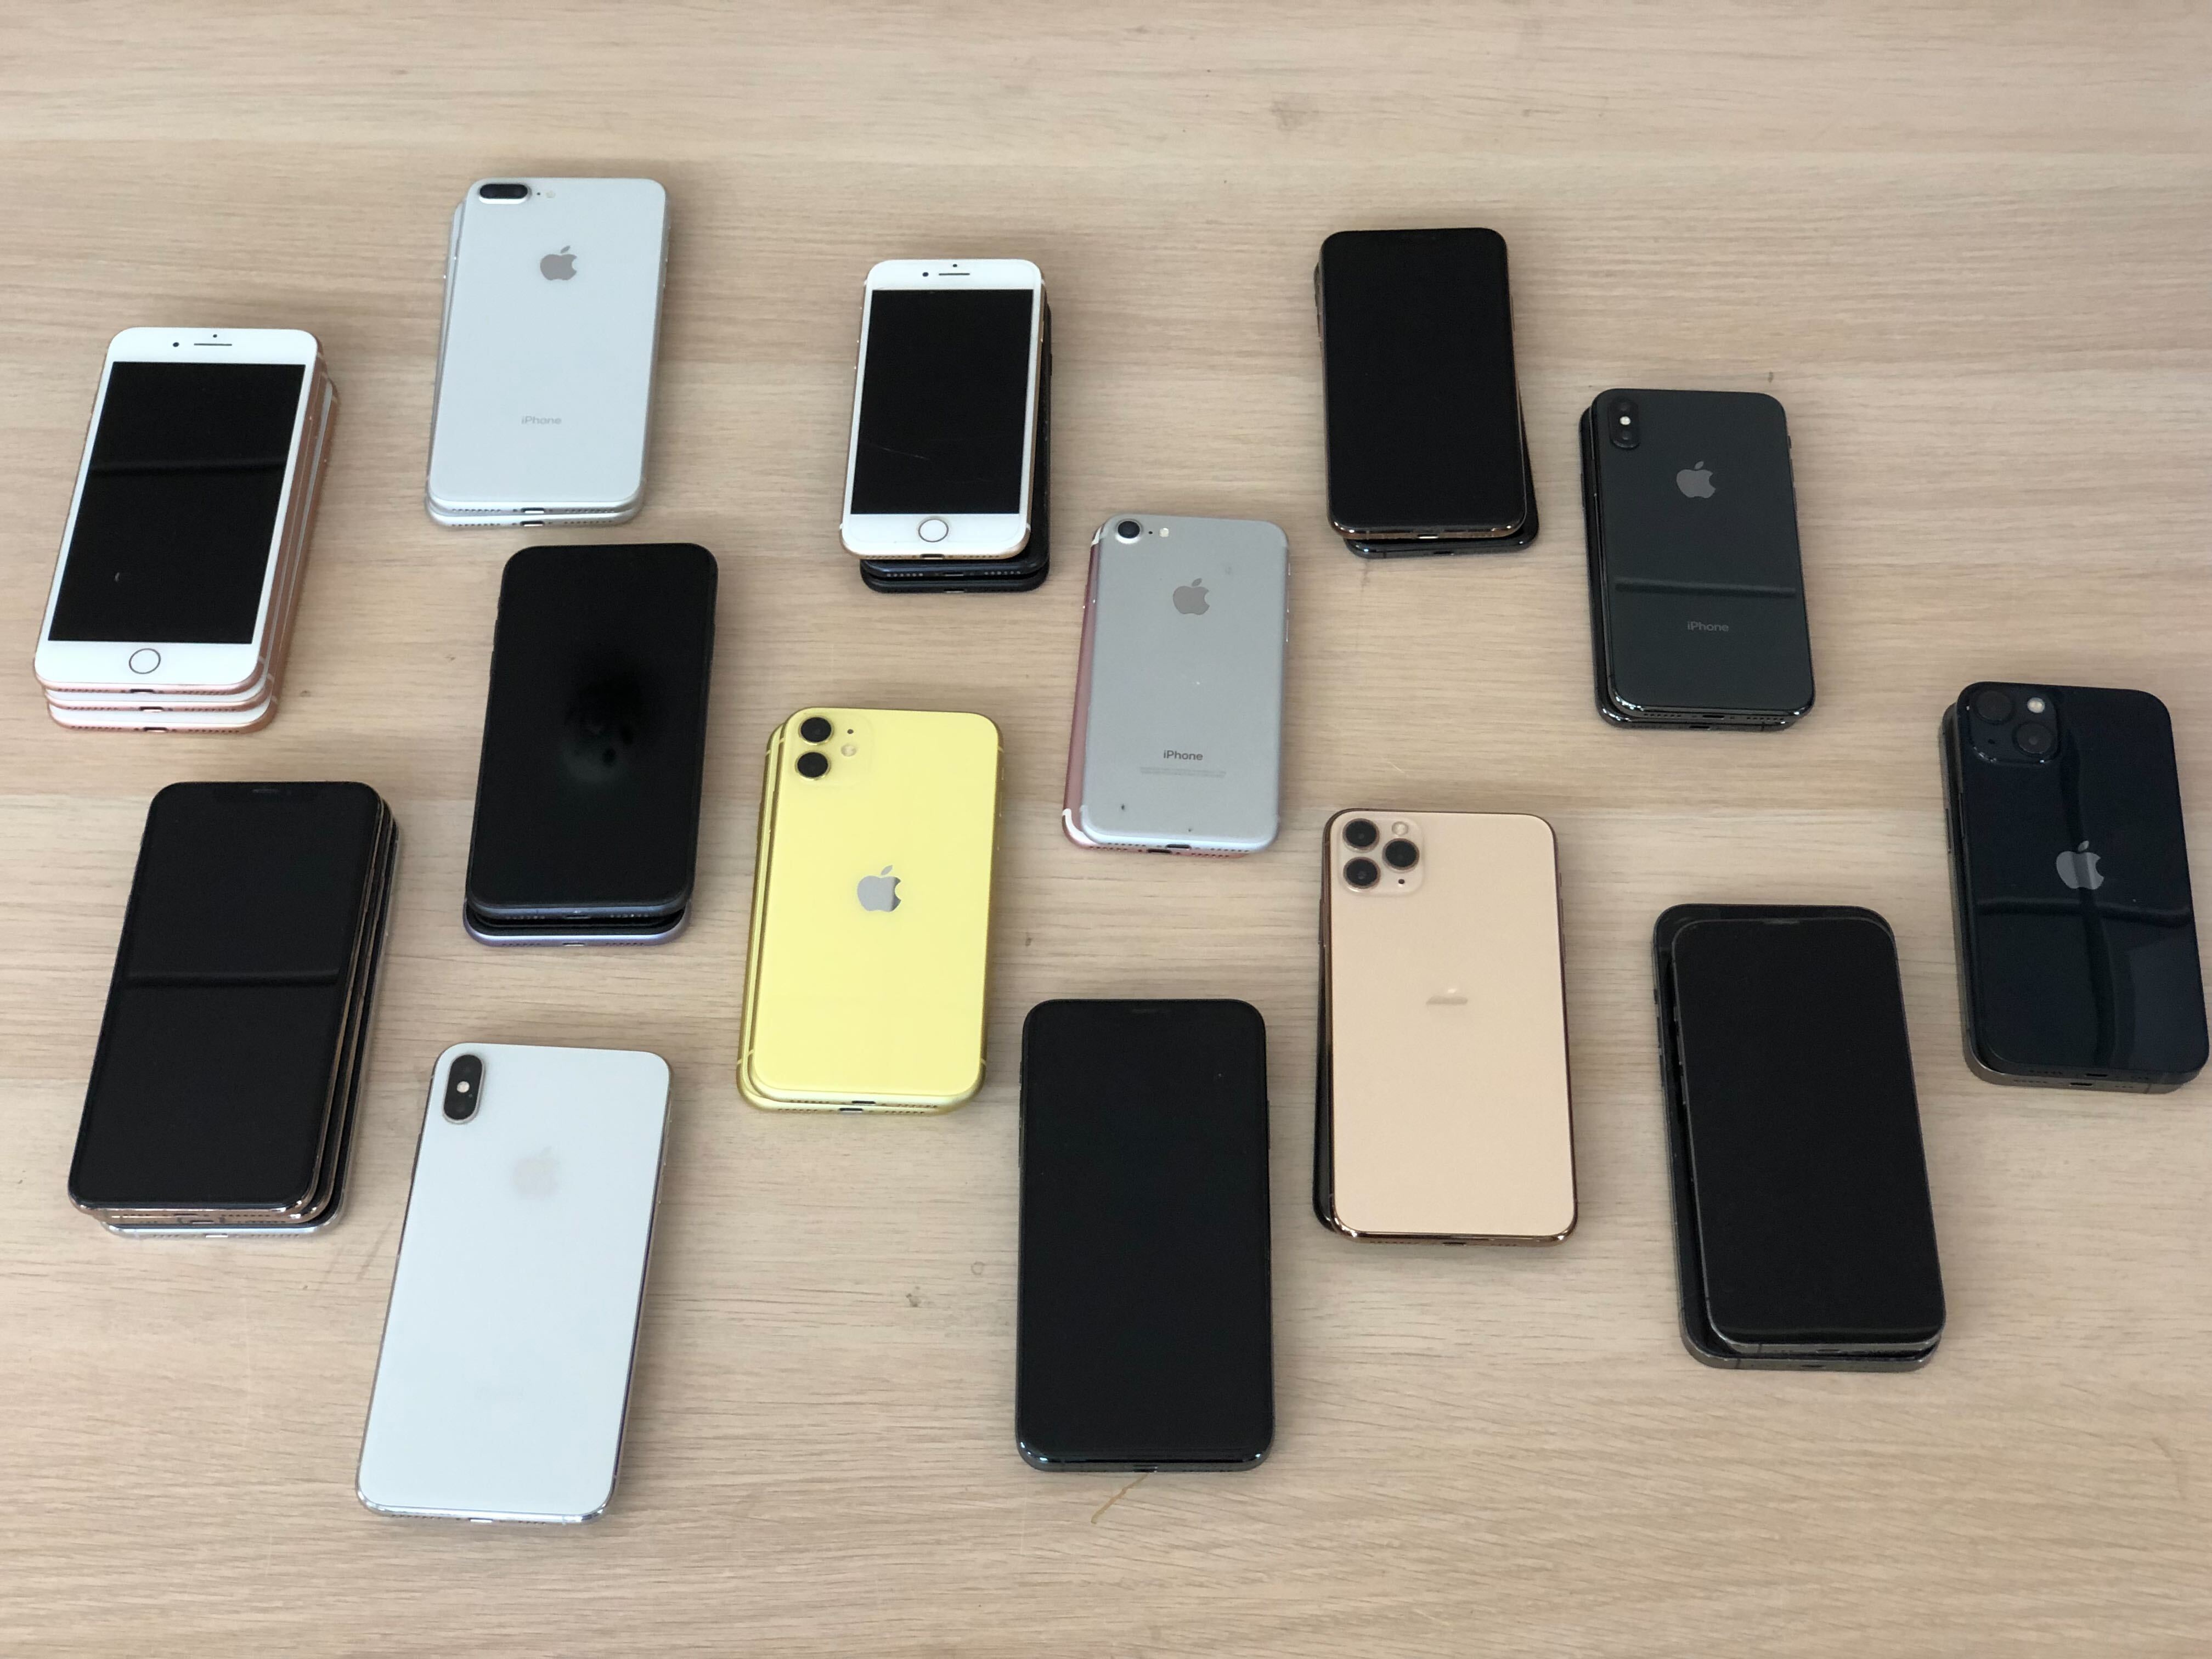 iPhone XR, XS, XS Max, 11,11 Pro, 11 Pro Max, 12, 12 Pro, 12 Pro Max For Sale